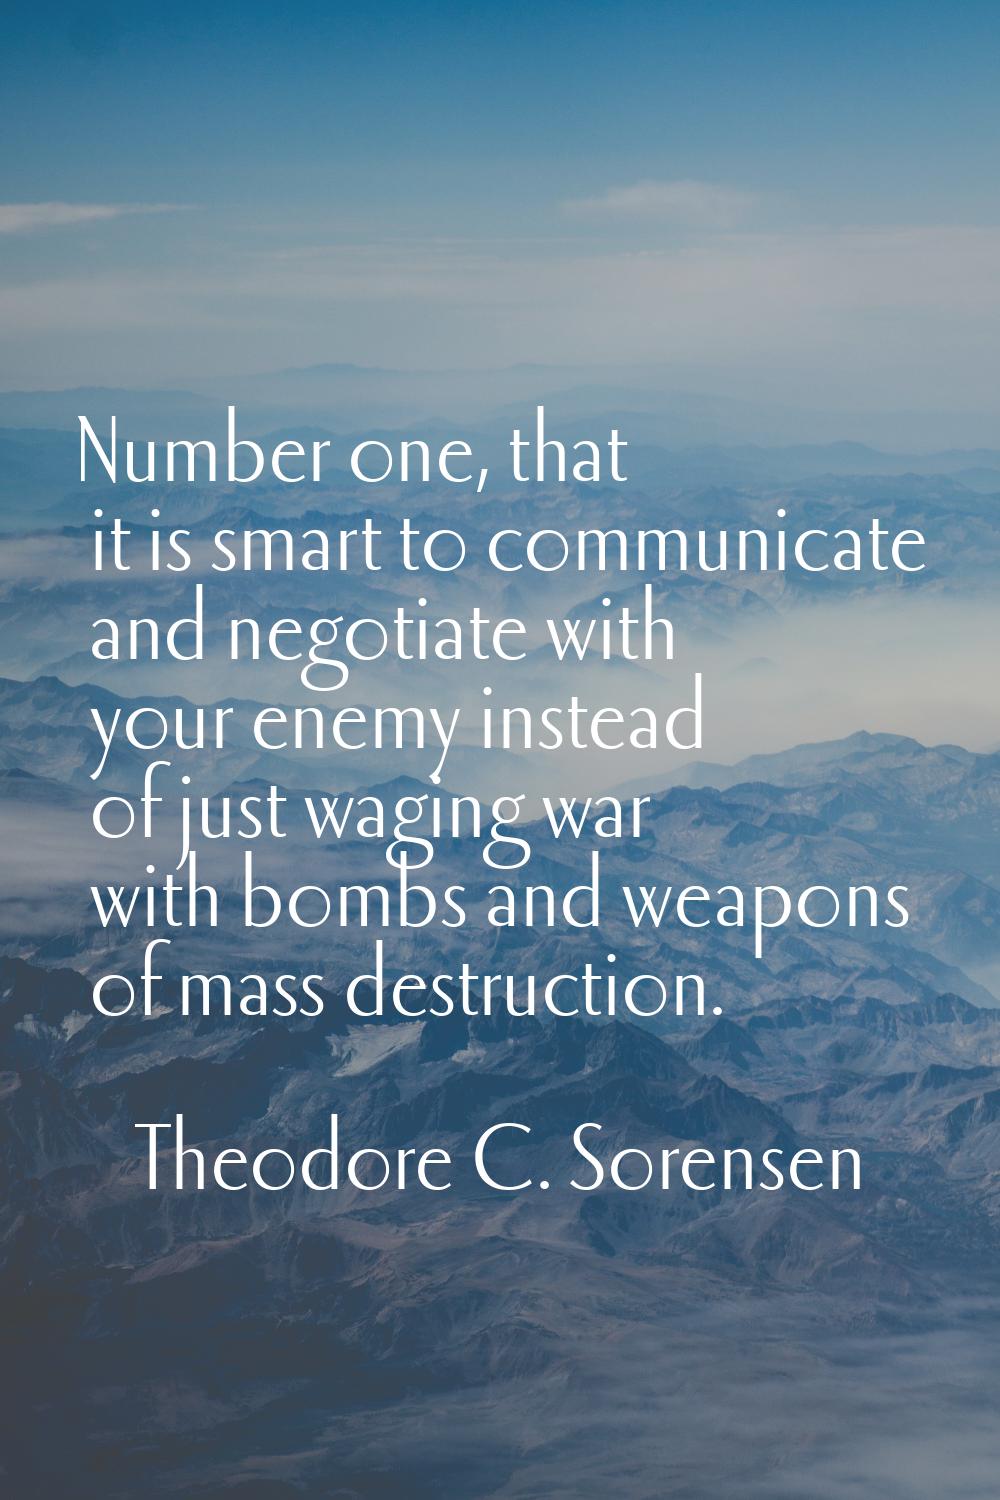 Number one, that it is smart to communicate and negotiate with your enemy instead of just waging wa